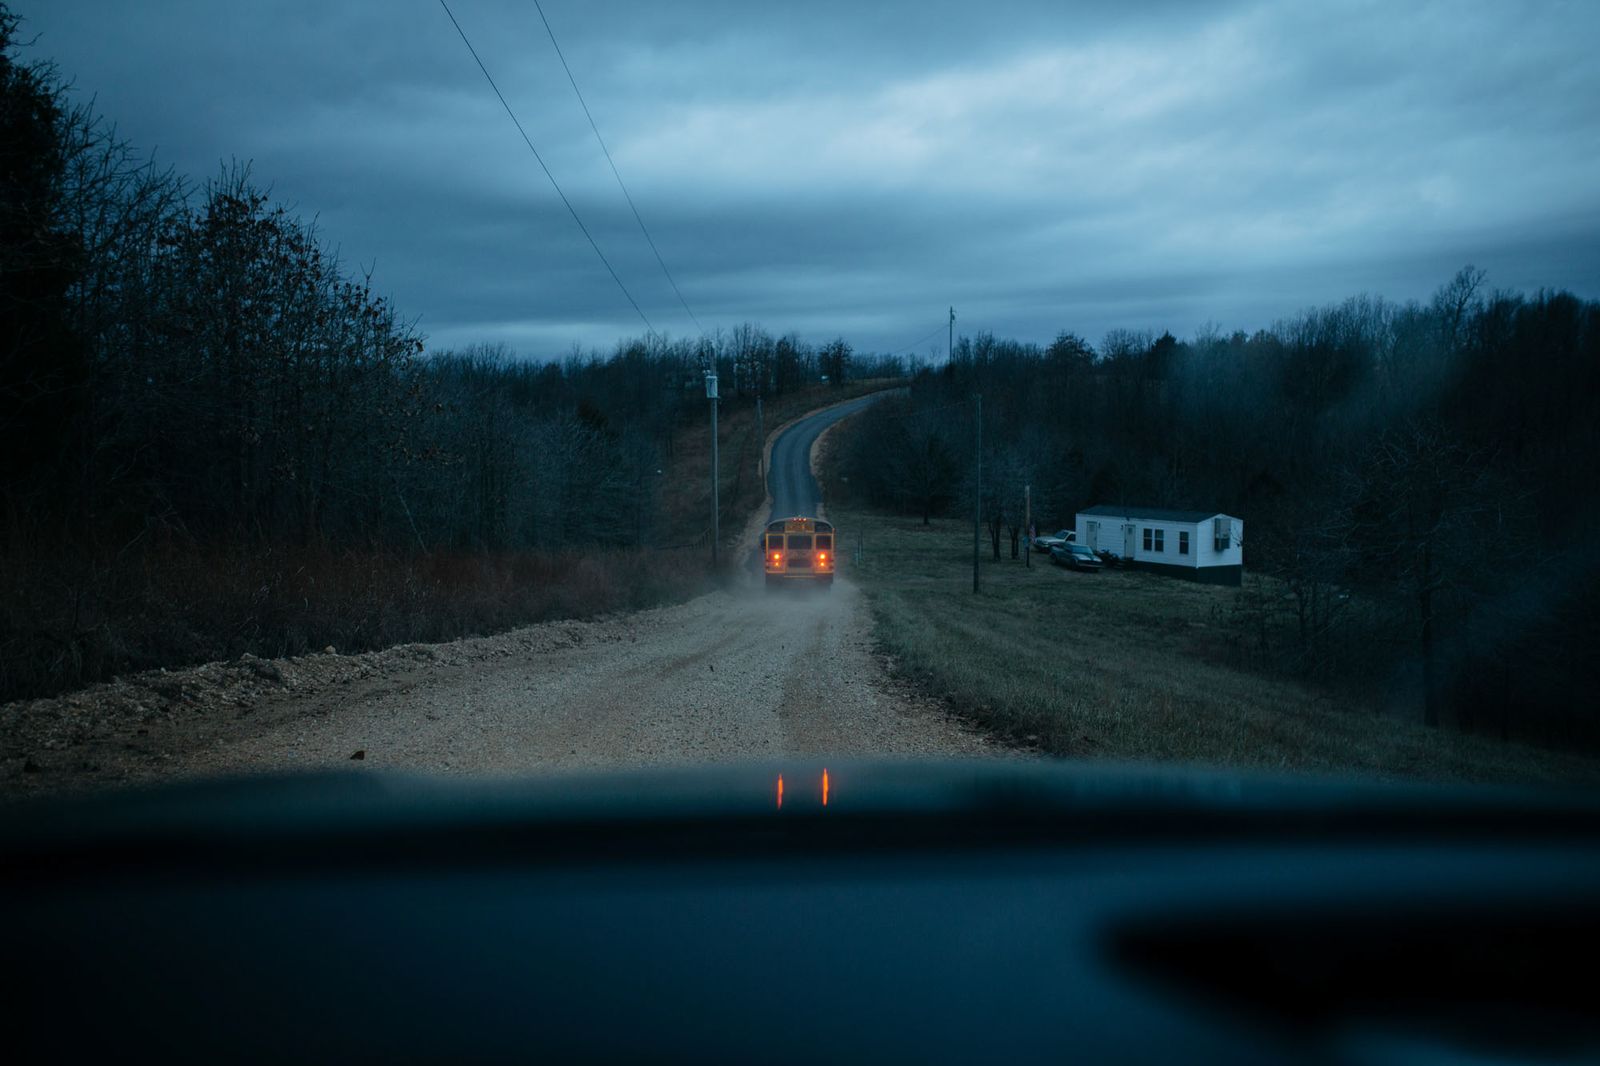 © Terra Fondriest - Image from the Ozark Life photography project